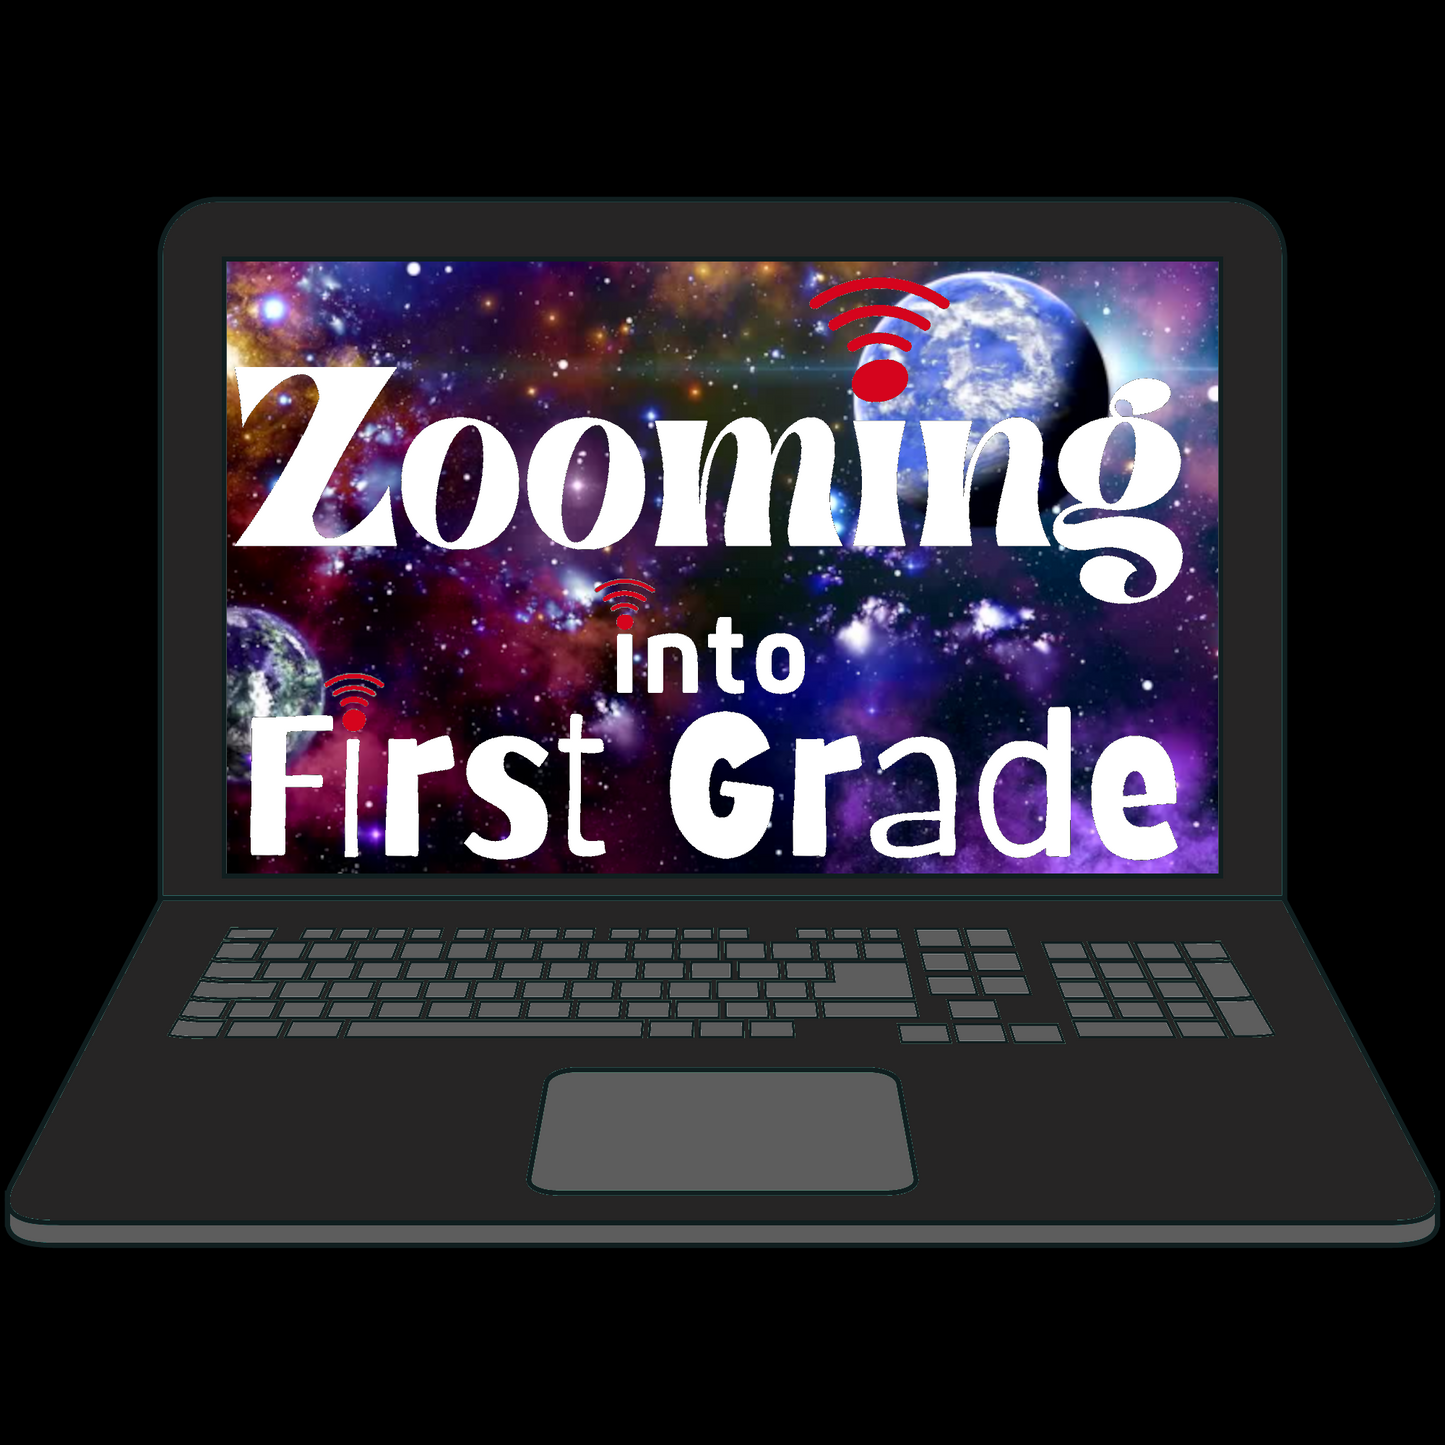 Zooming into First Grade